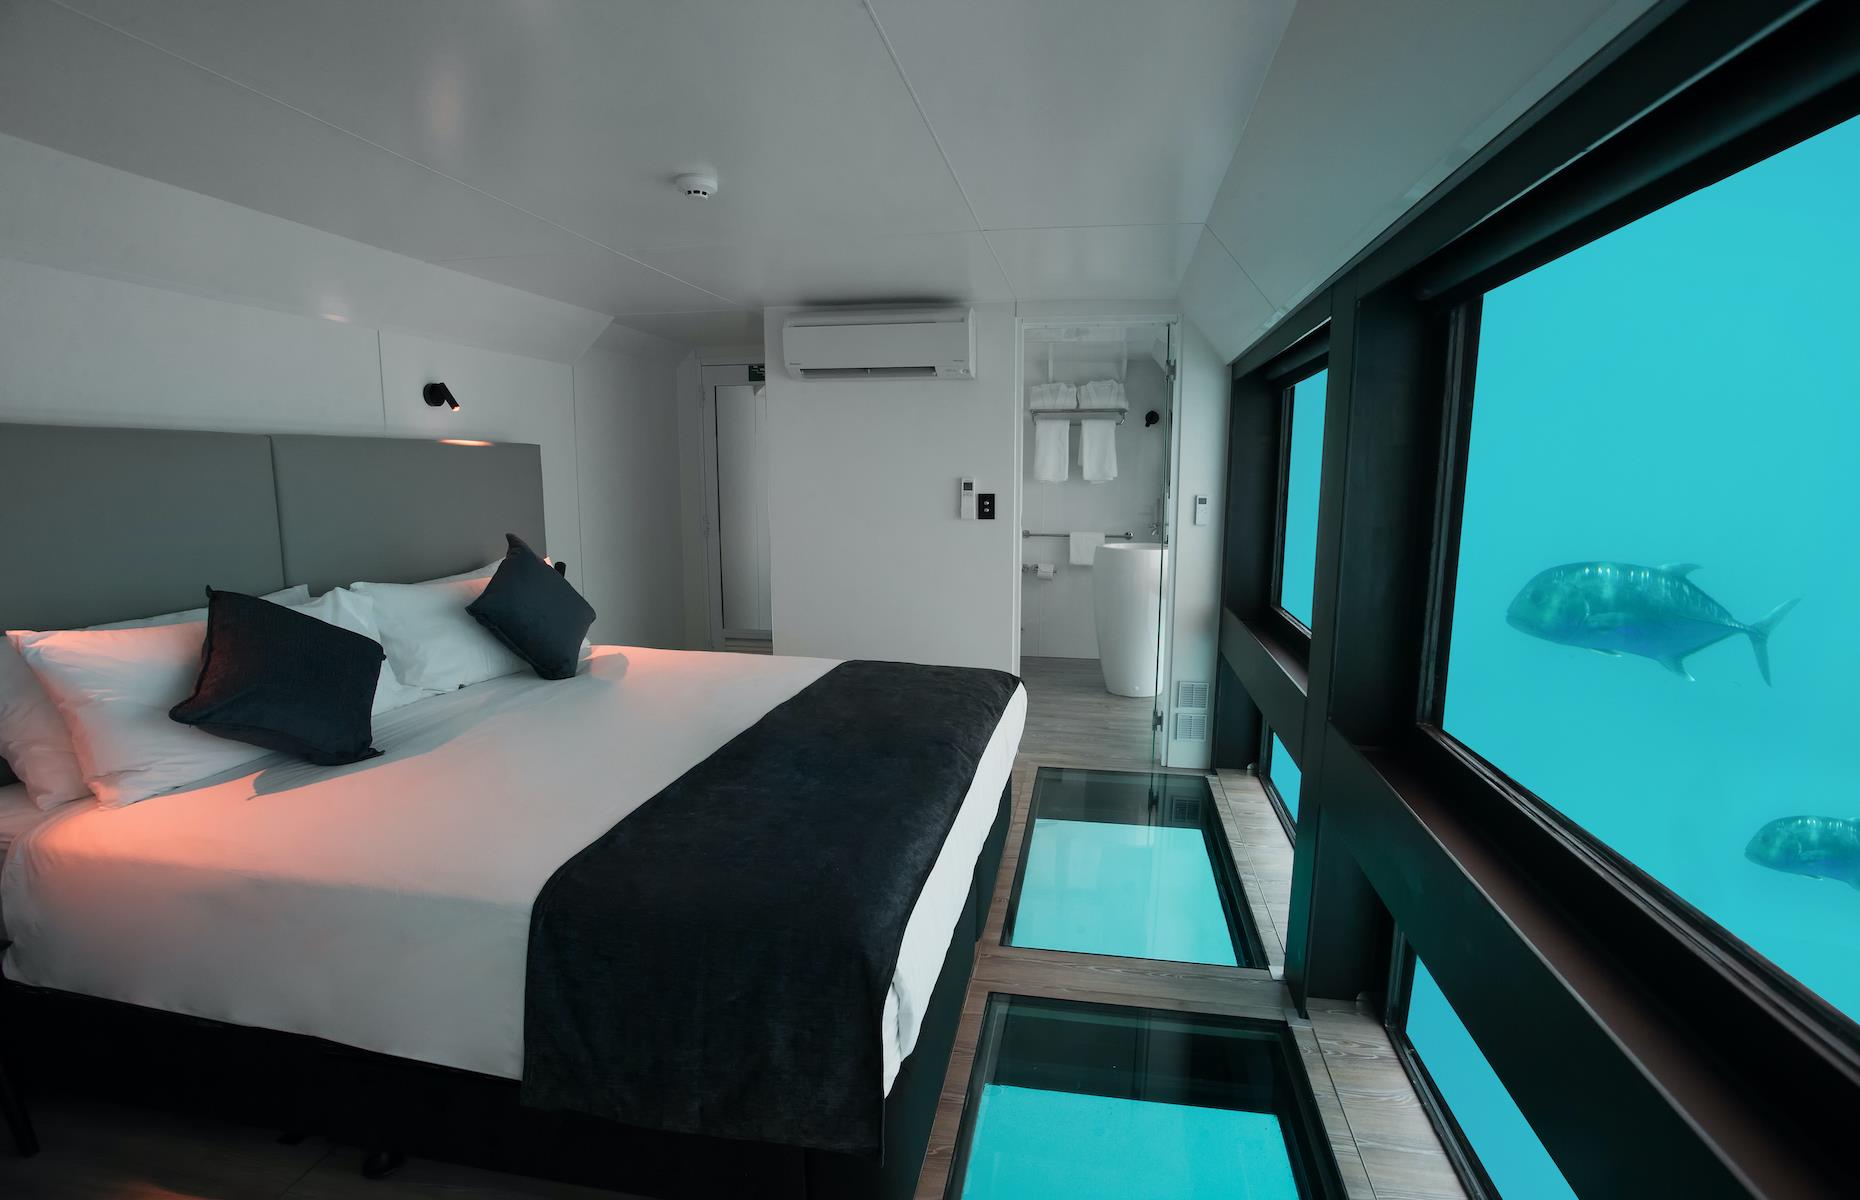 <p>If you thought sleeping inside a giant aquarium was extraordinary, how about bedding down in the world’s largest tropical coral reef? Two new glass-walled hotel suites have opened beneath the waves of Australia's Coral Sea, offering marine lovers a window onto the myriad wonders of the Great Barrier Reef. Billed as Australia’s first underwater hotel, <a href="https://cruisewhitsundays.com/experiences/reefsuites/">the Reefsuites</a> opened in December 2019 just off Hardy Reef near the Whitsundays archipelago. </p>